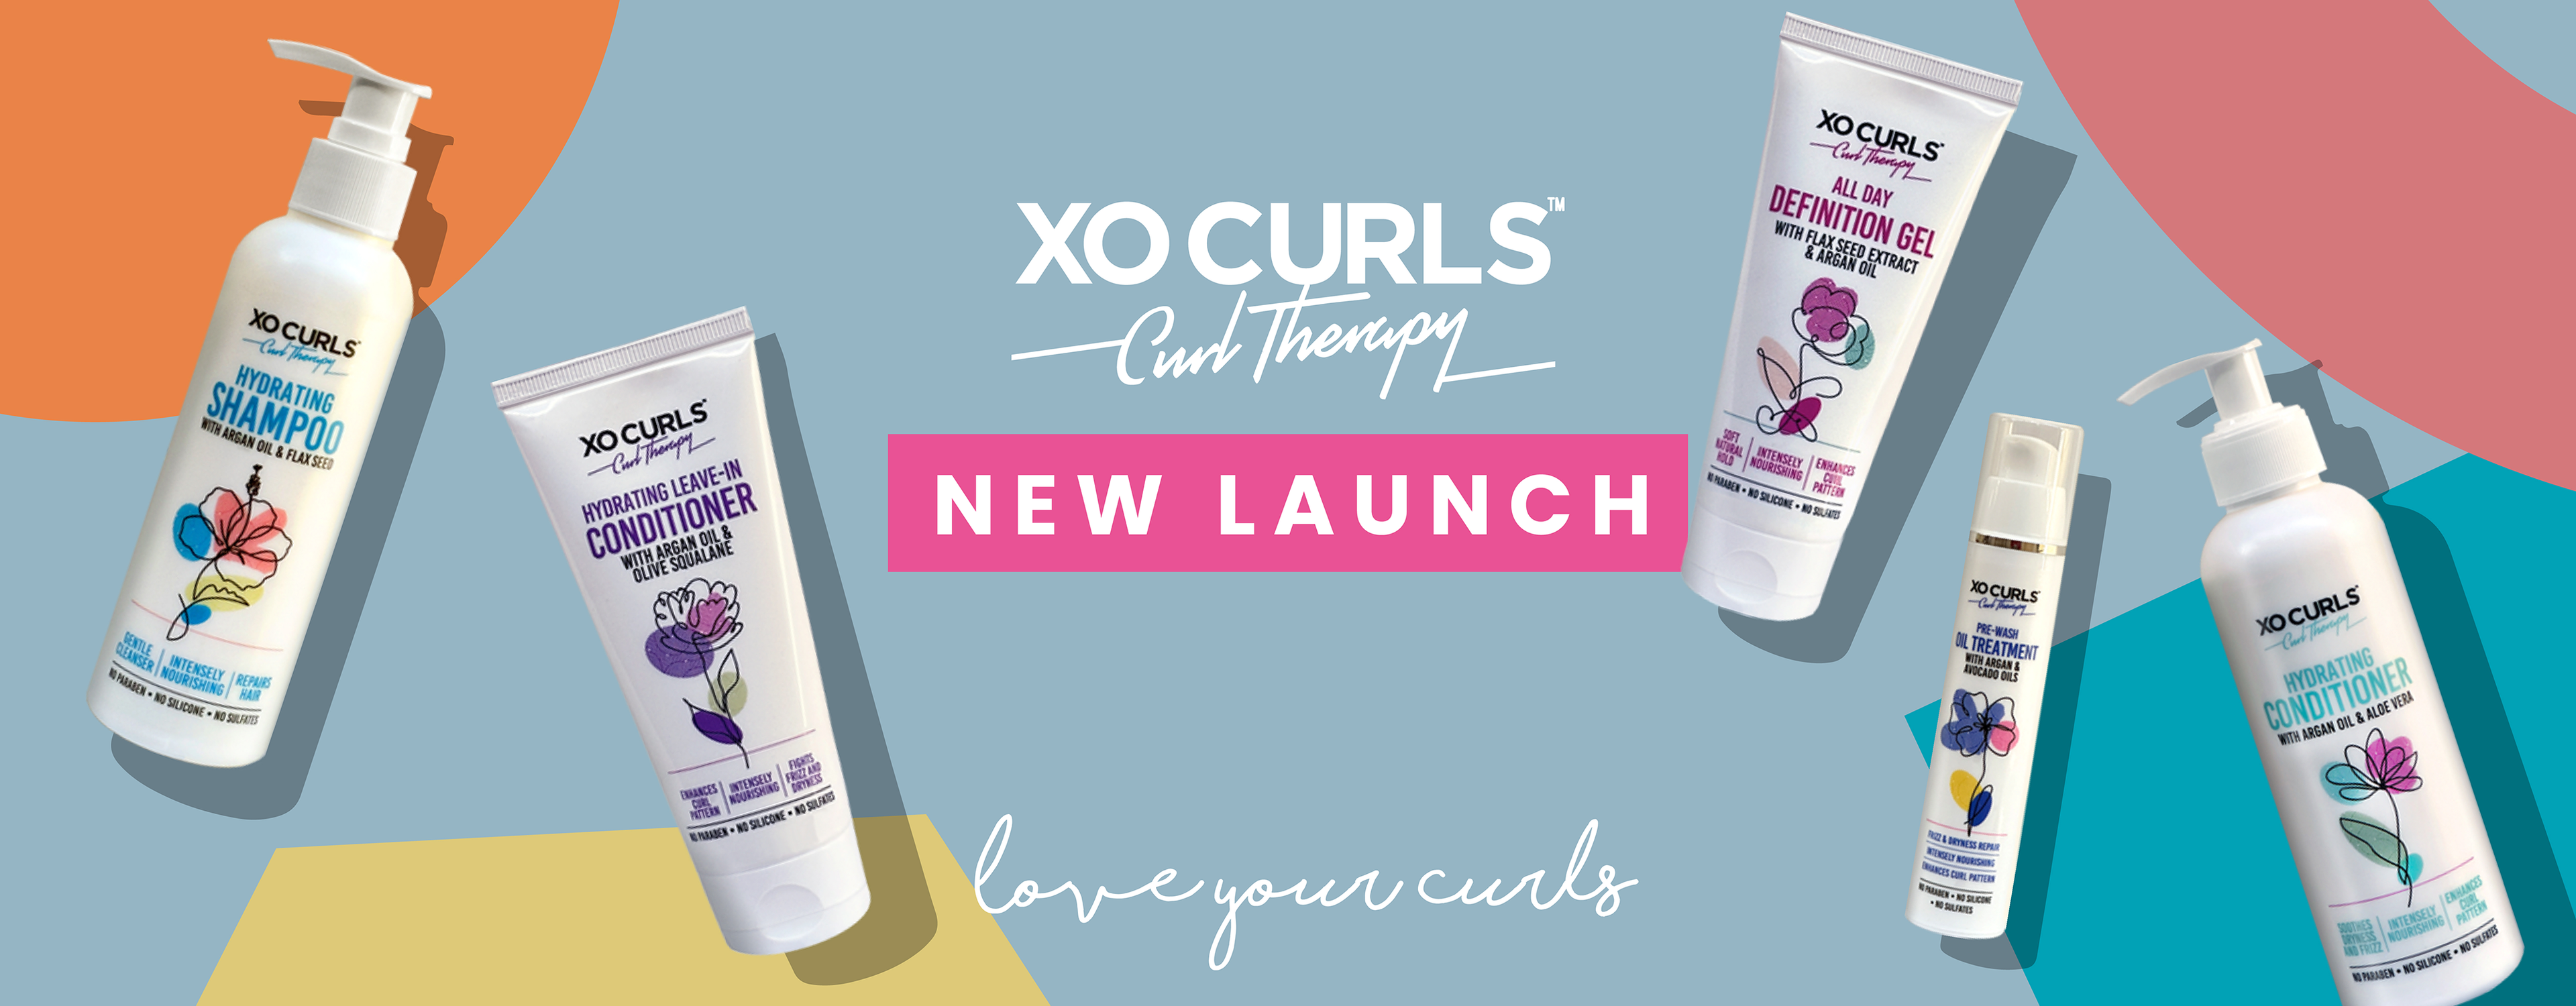 Xo Curls Curl Therapy - New Hydrating Shampoo, New Hydrating Leave-in Conditioner, New All Day Definition Gell, New Hydrating Conditioner